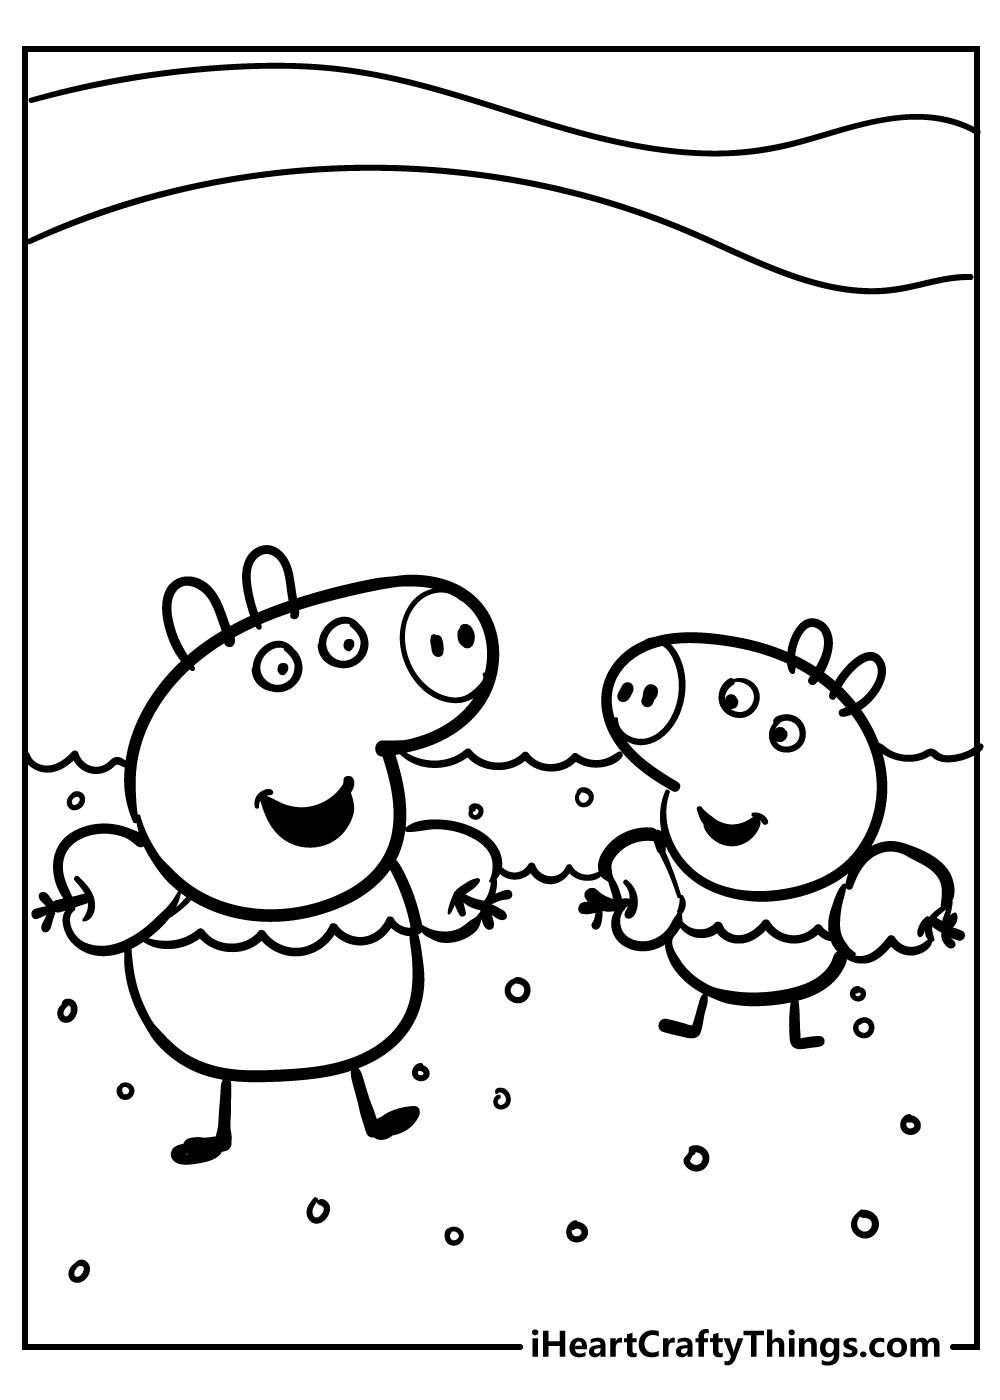 Peppa Pig coloring pages free pdf download